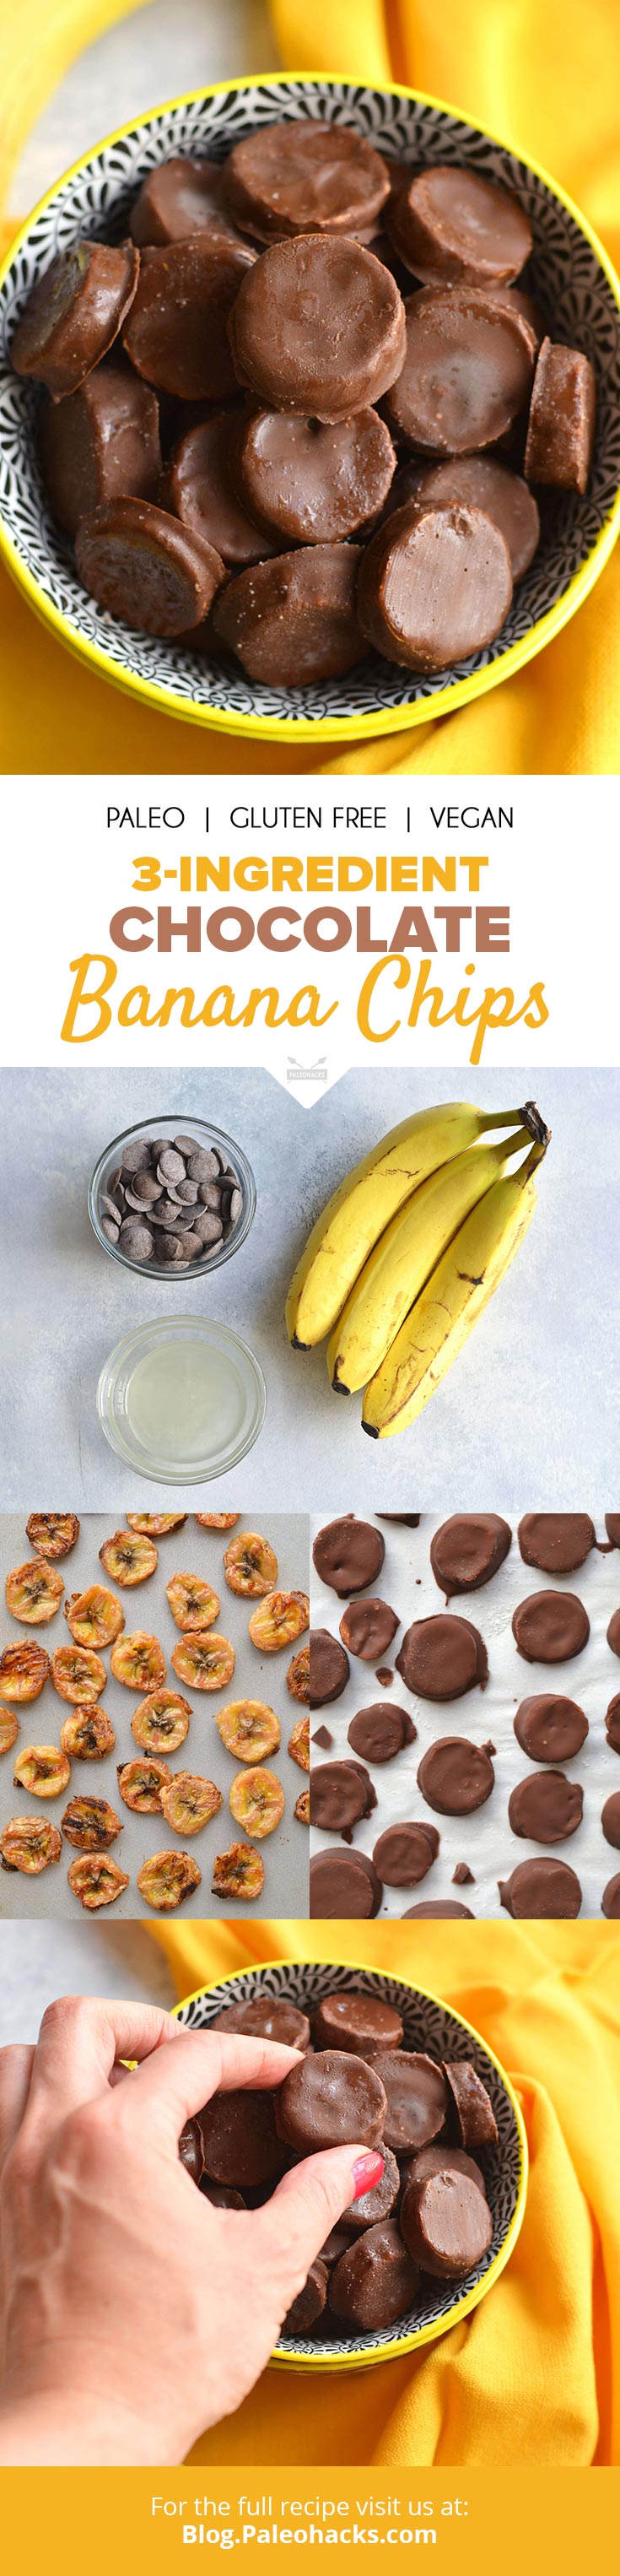 Enjoy your chocolate covered banana chips as a healthy snack any time of day or take them to your favorite outing to share with your friends!